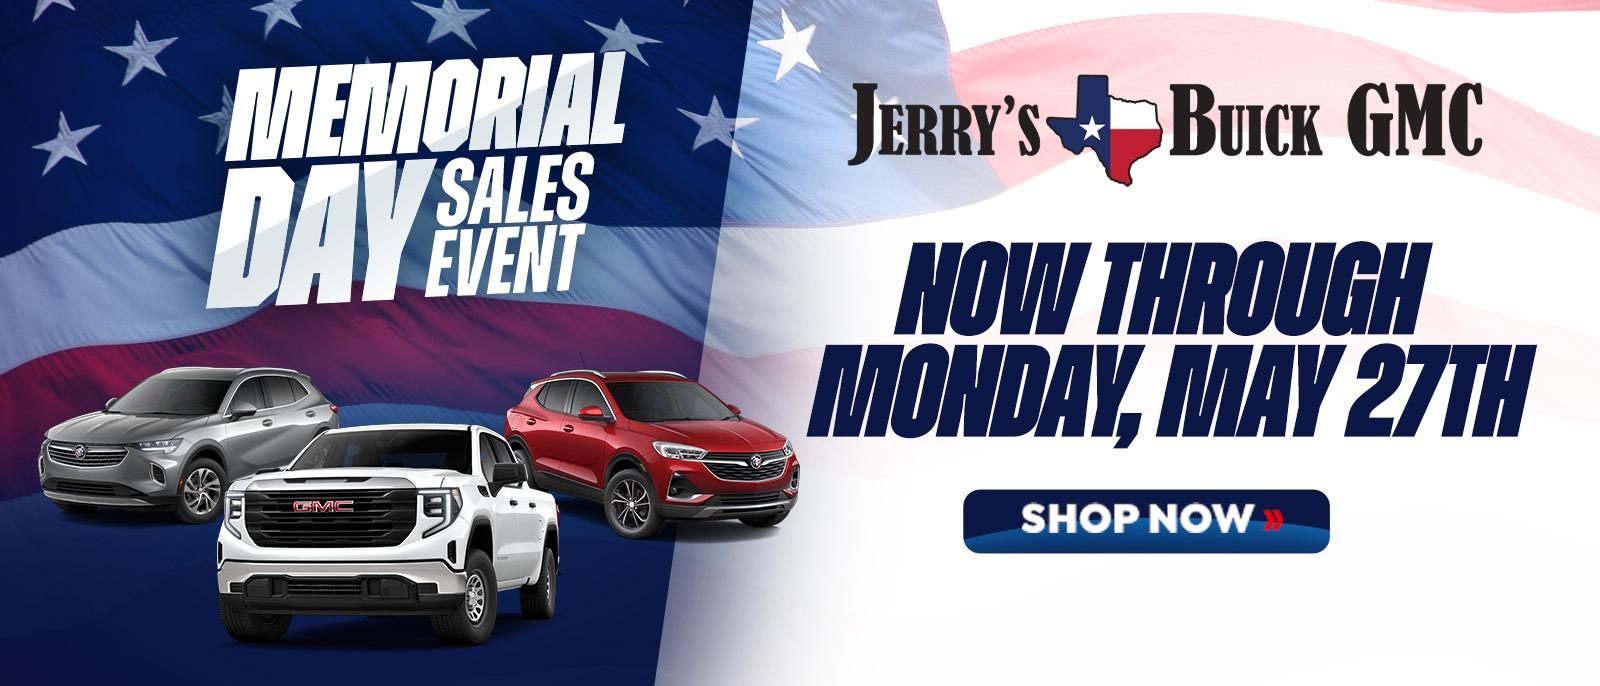 Jerrys Buick GMC Memorial Day Sales Event